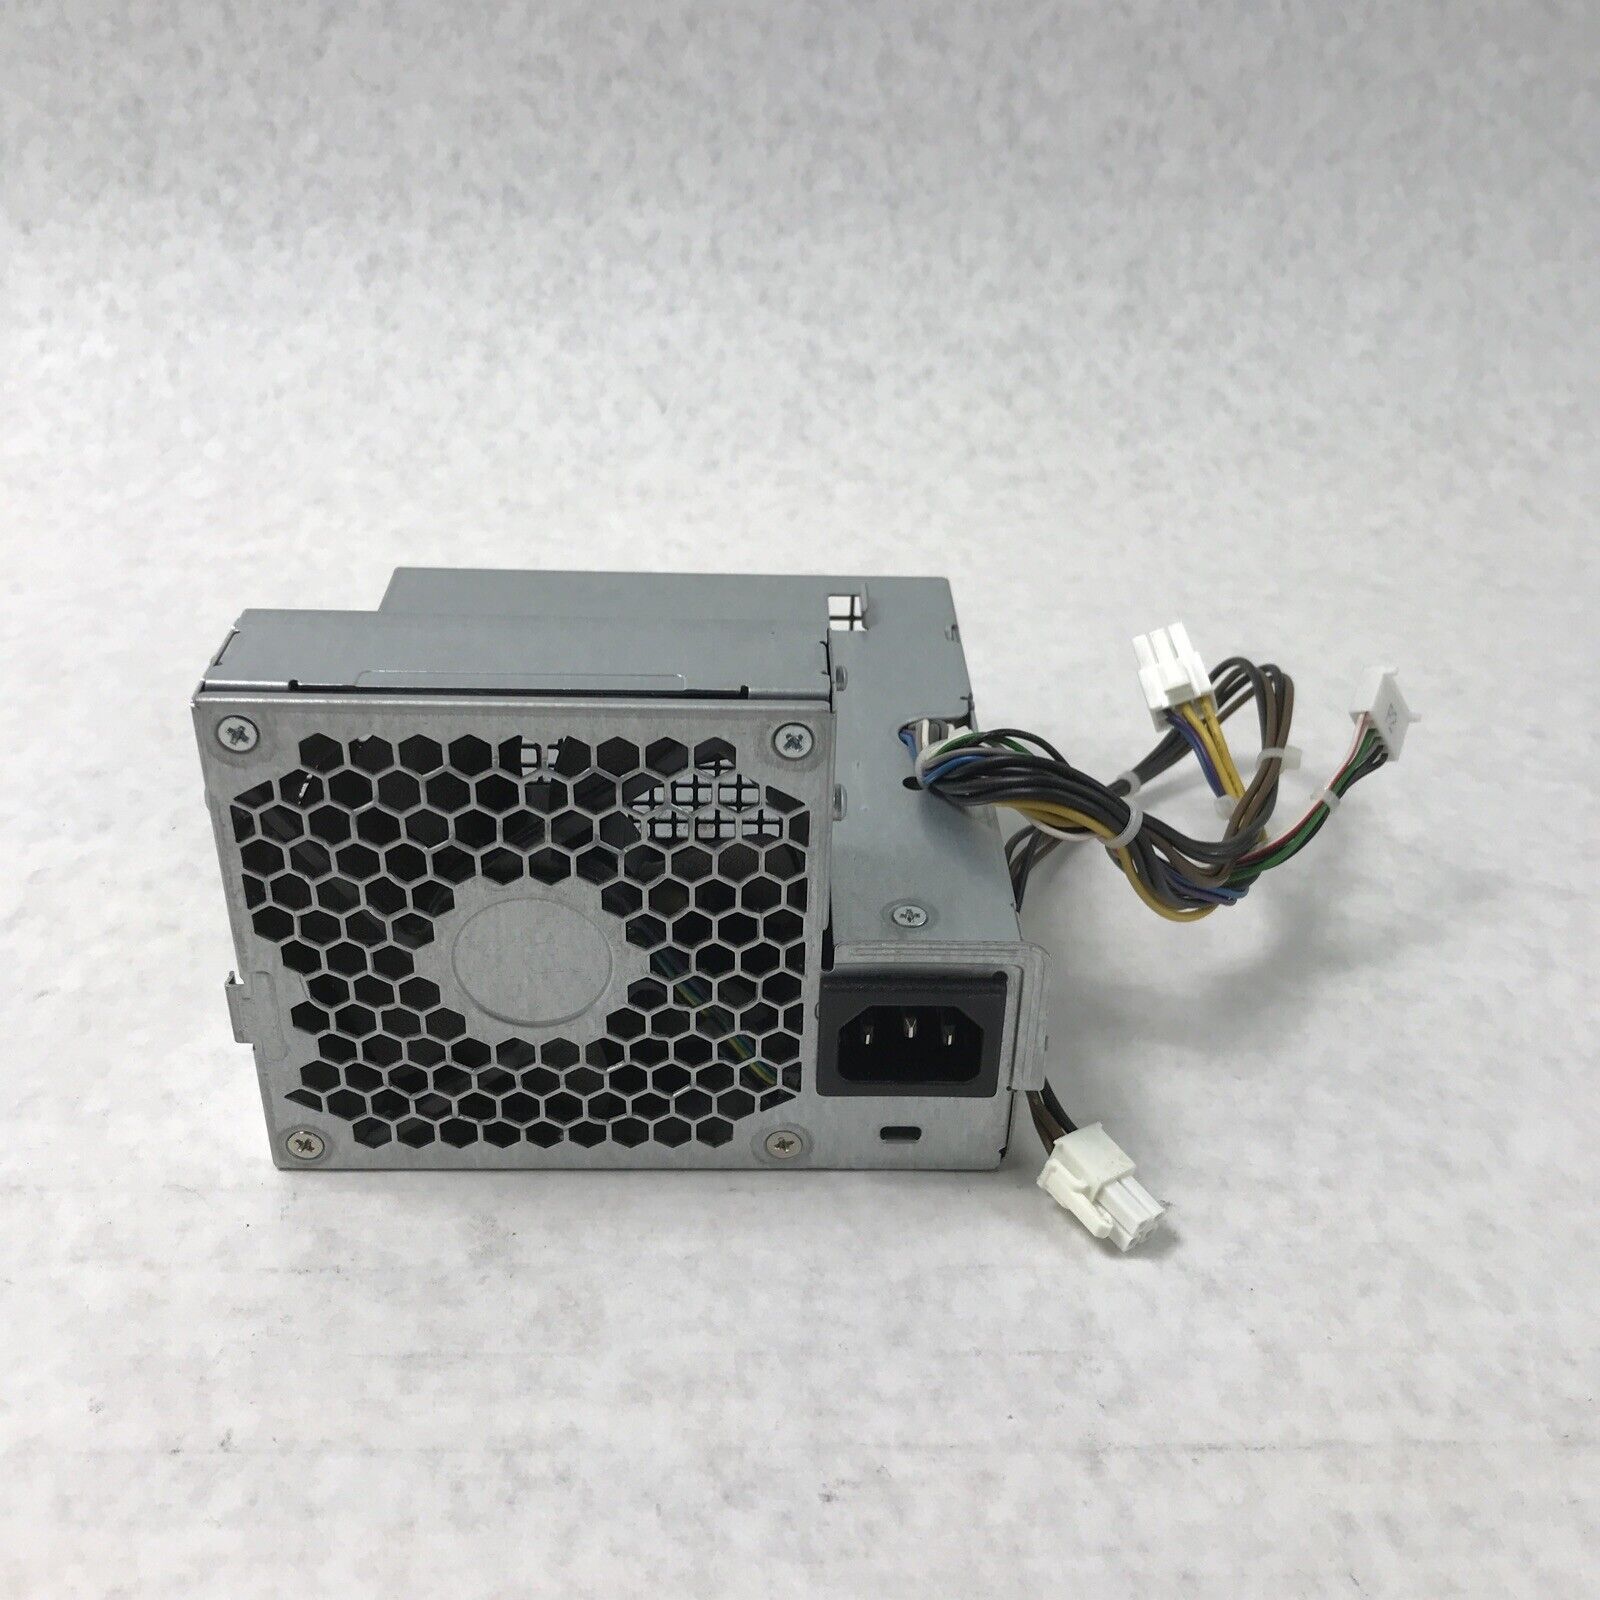 Genuine HP 503375-001 DPS-240RB Power Supply (Tested and Working)